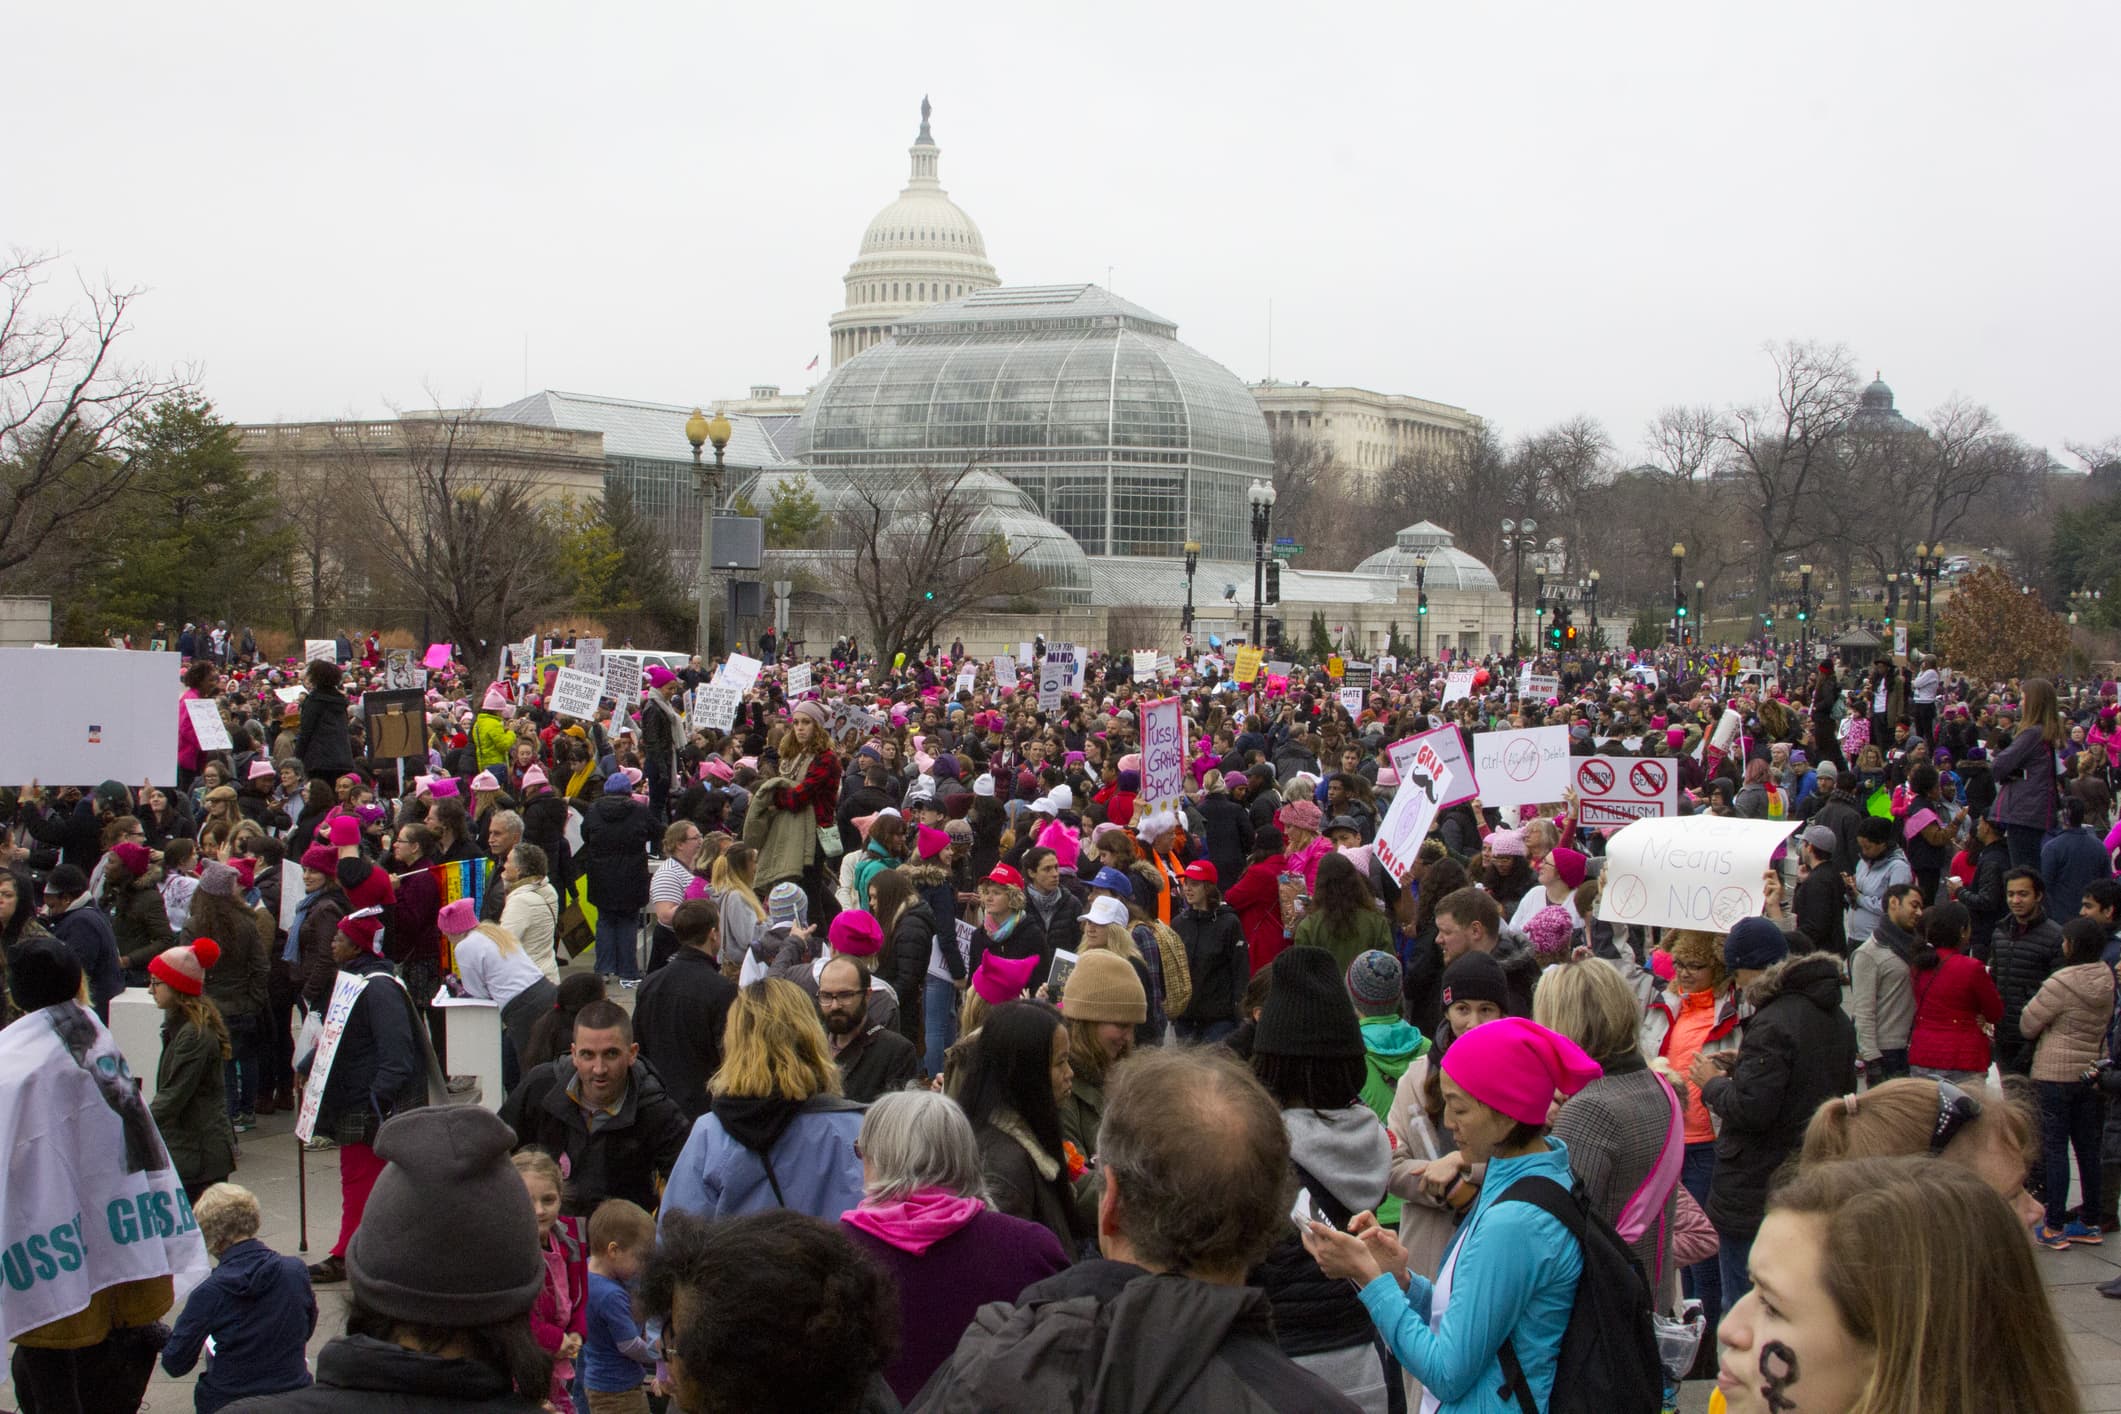 A view from a crowd of marchers at the Women's March in Washington, D.C., with the Capitol building.